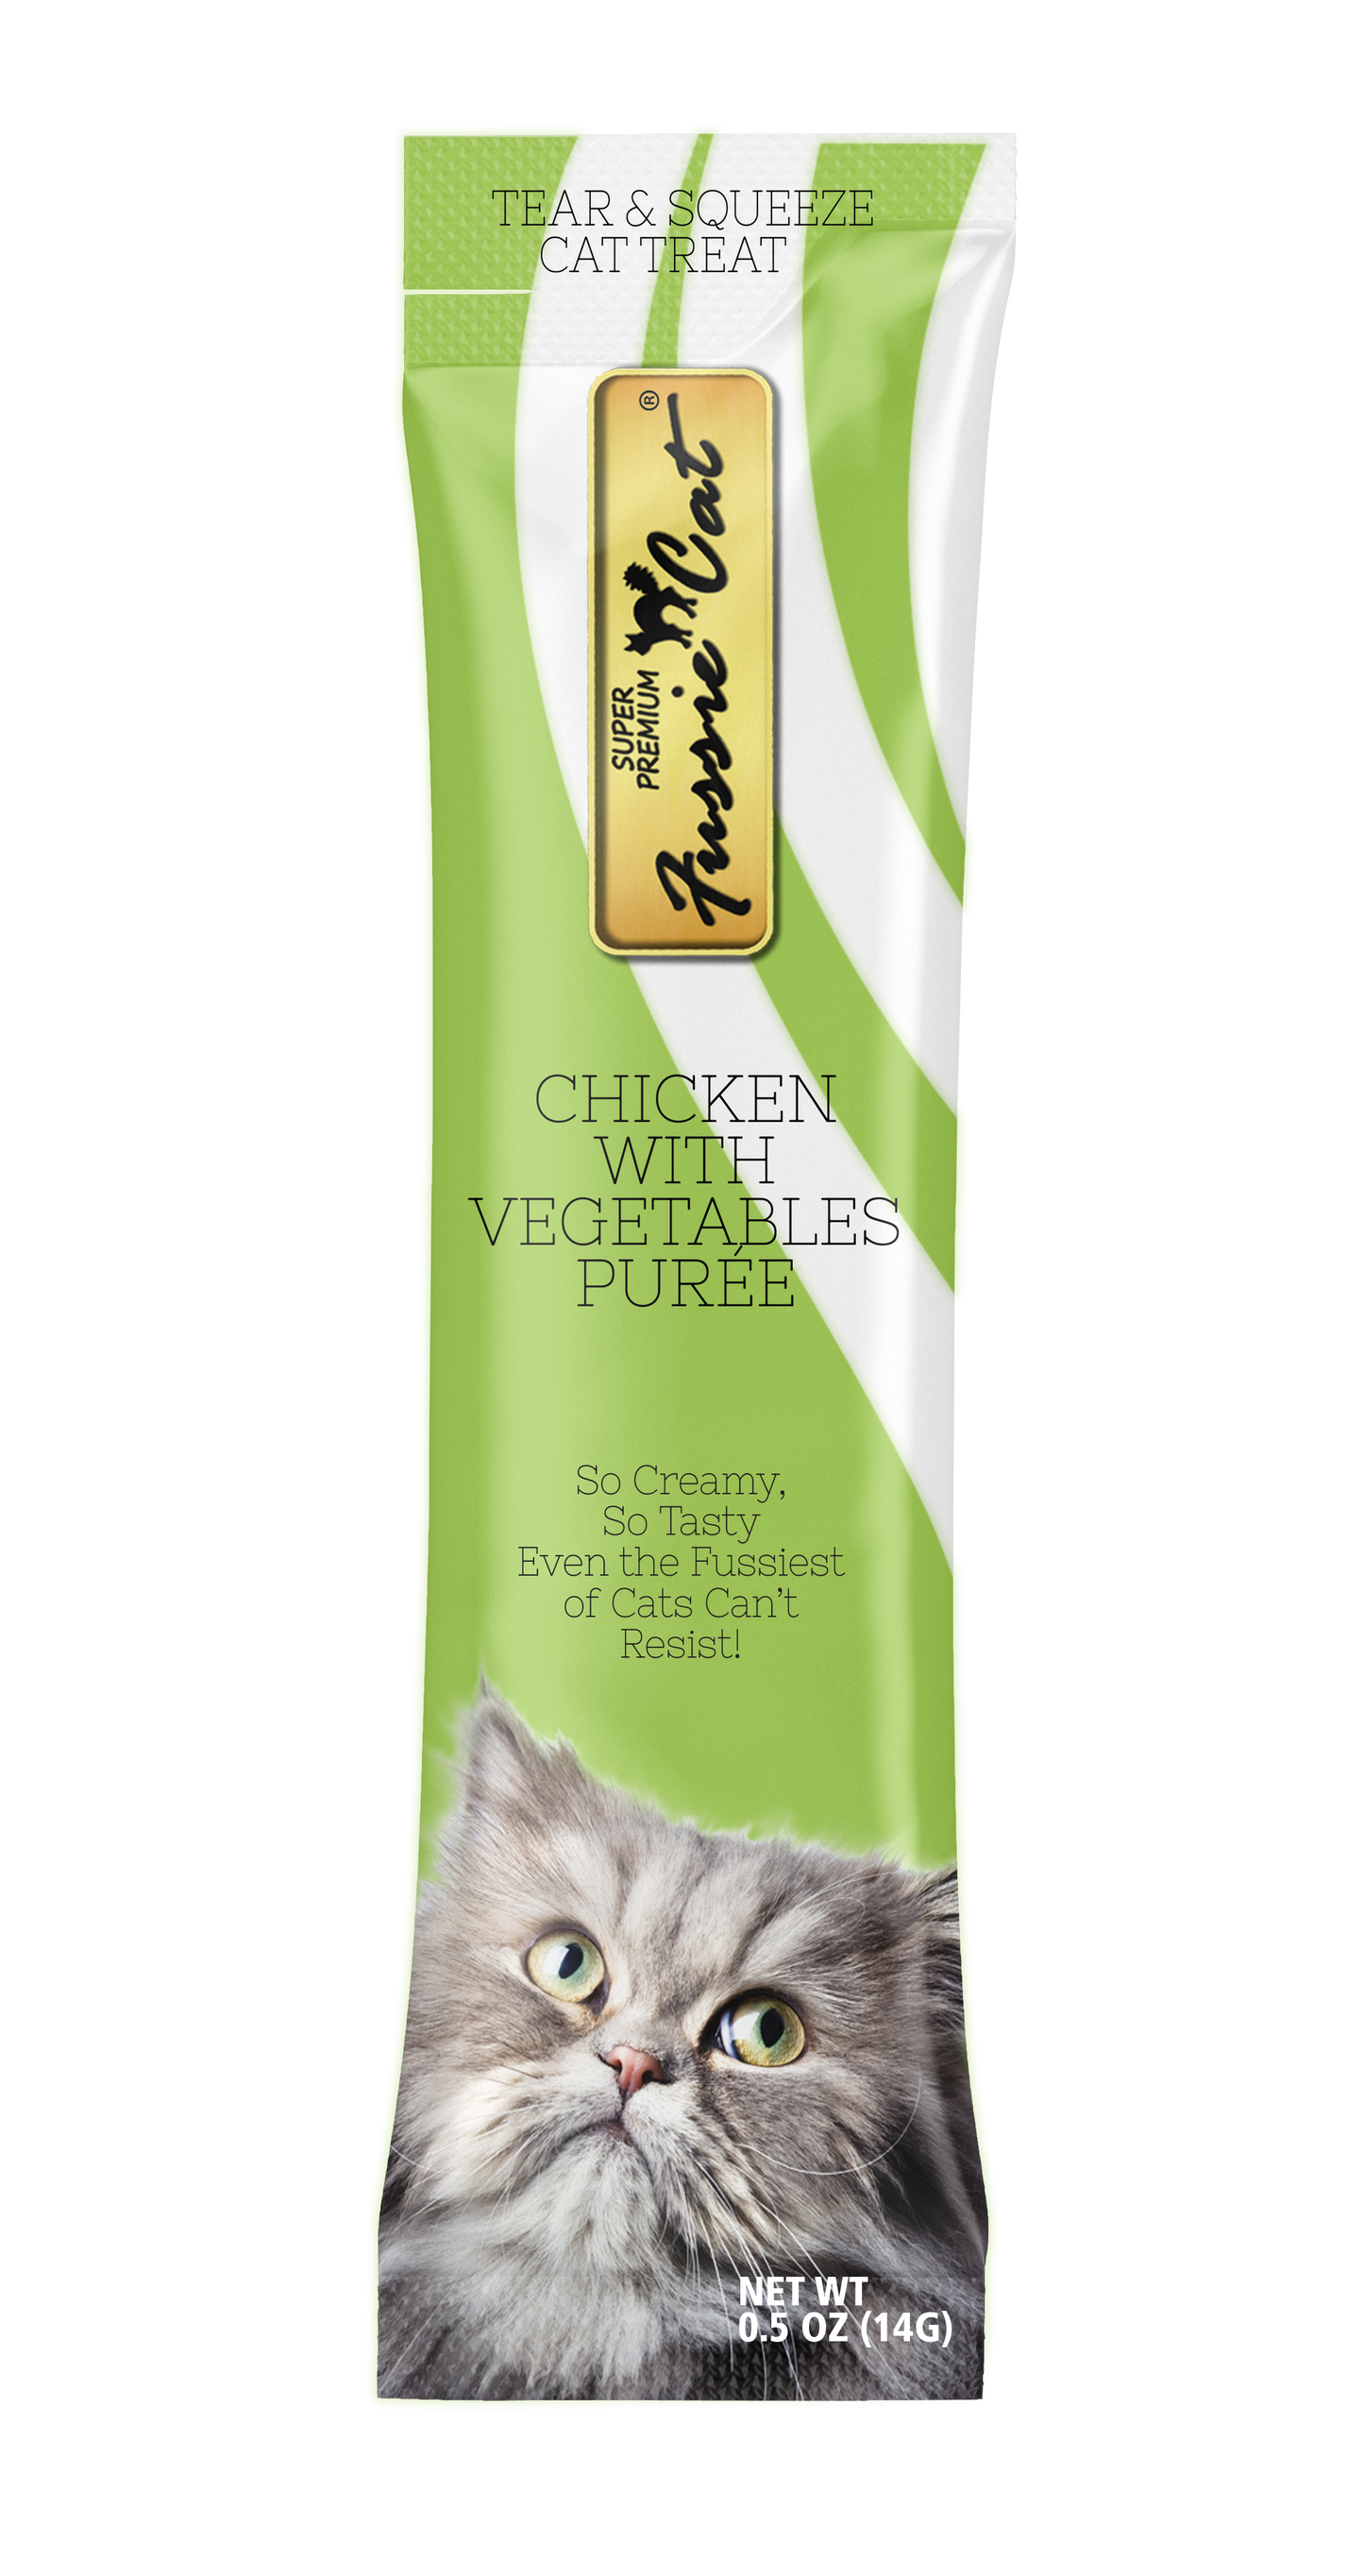 Fussie Cat Chicken With Vegetables Purée 0.5-oz, 4-Pack, Cat Treat